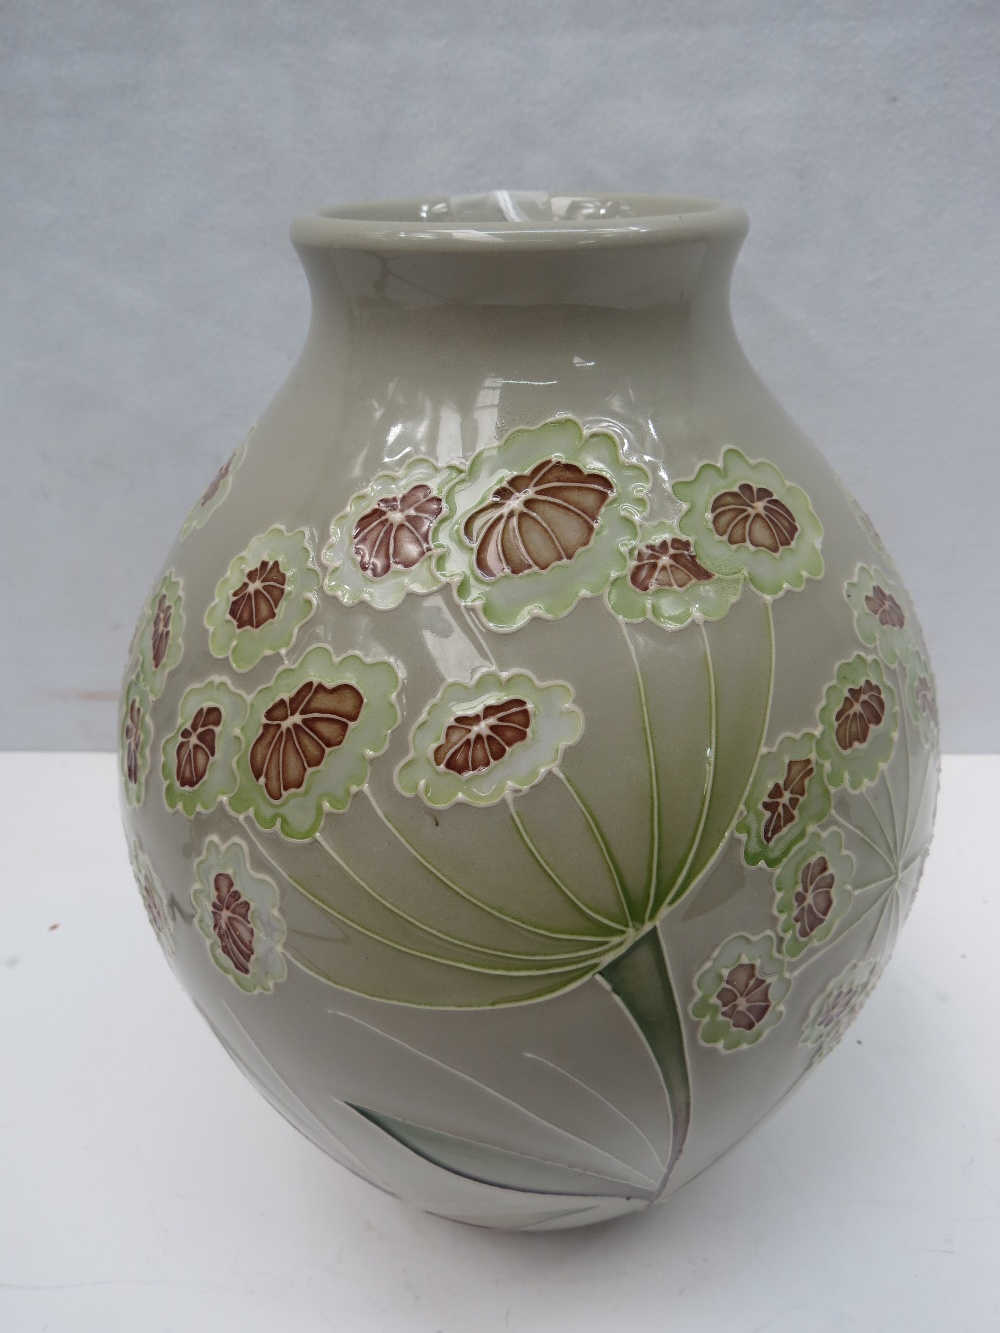 A 2012 edition, Moorcroft grey ground vase with multiple head flowers on delicate stems. 'Trial'